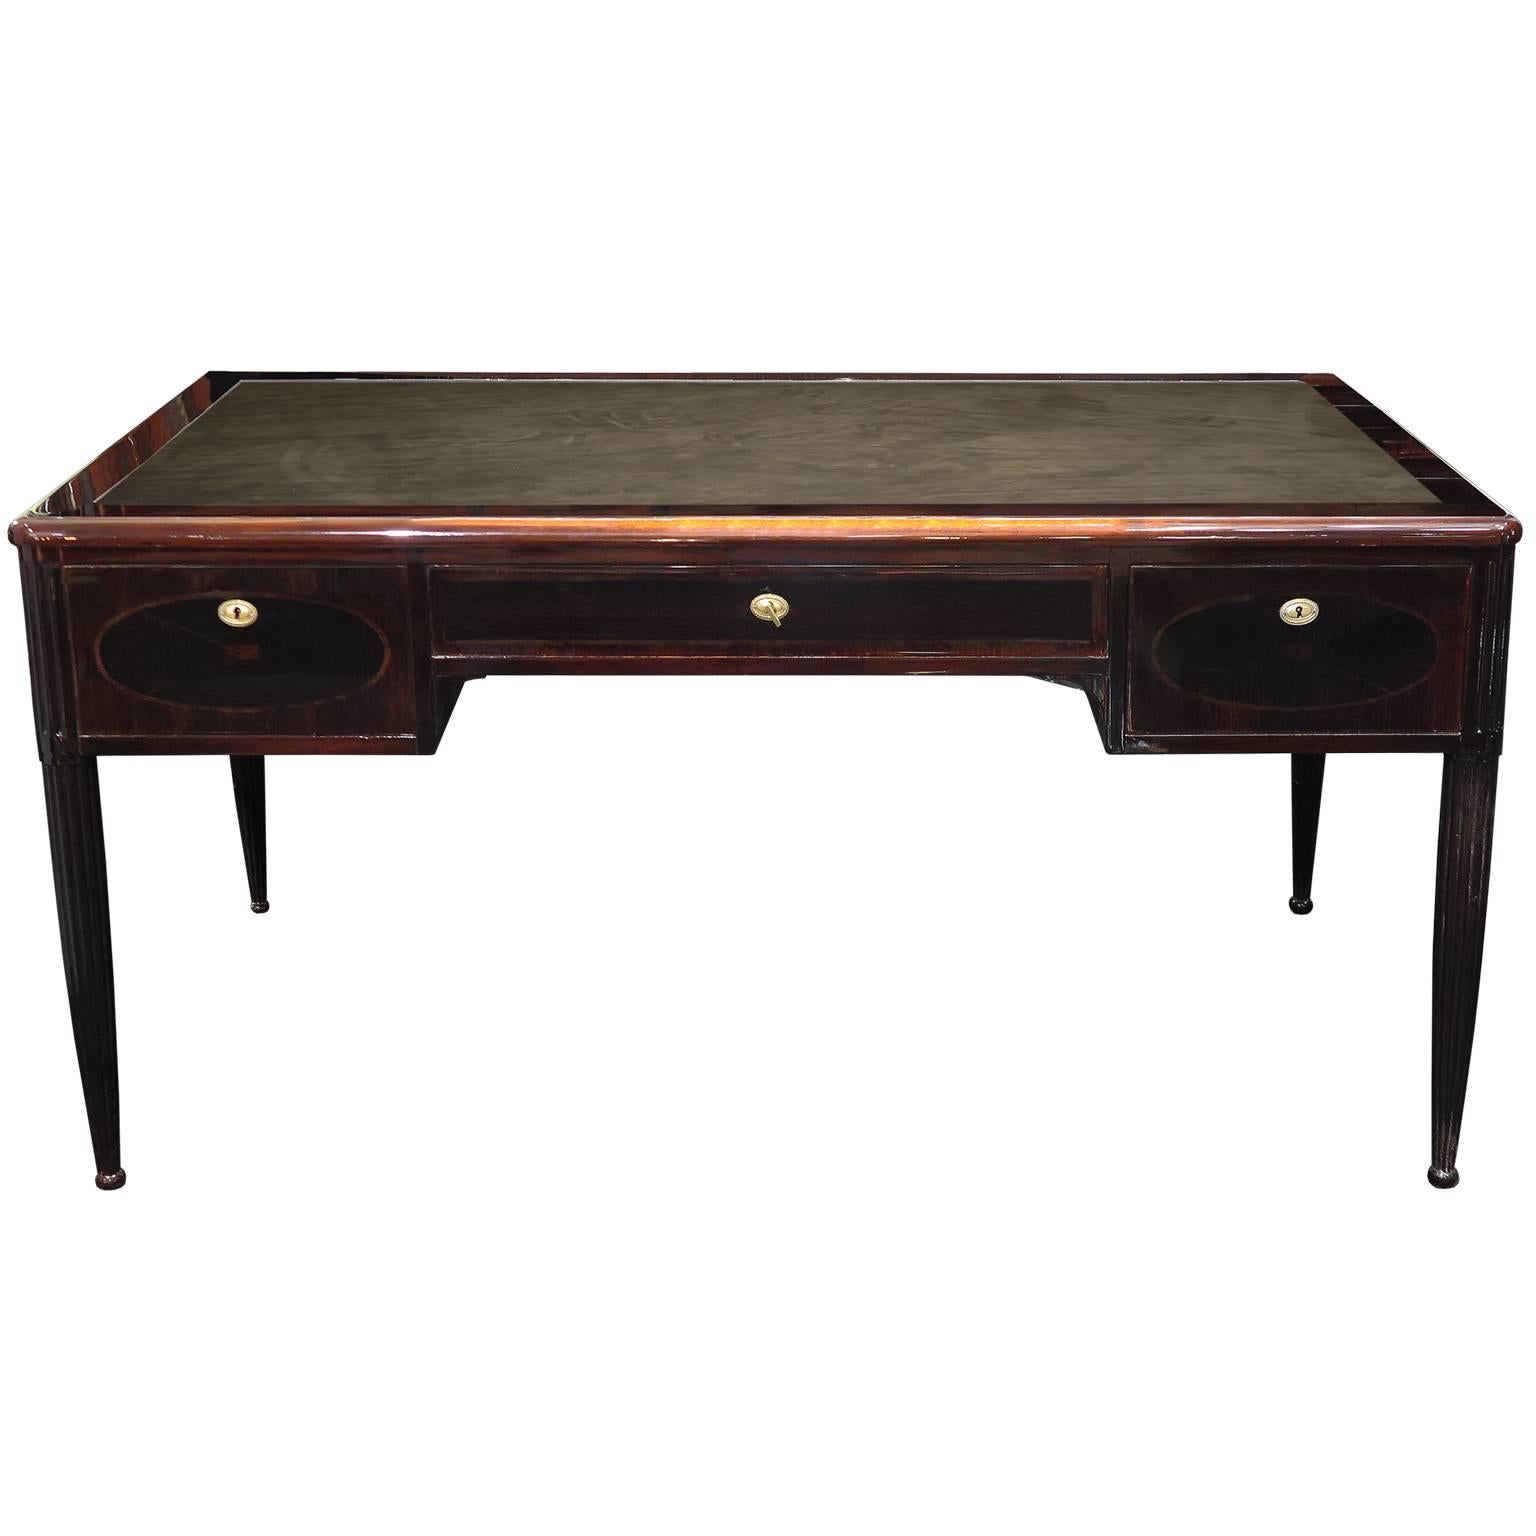 Beautiful Macassar ebony and mahogany desk. Desk has Macassar marquetry inlays on front and back drawers. Desktop and side shelves are covered in black suede. The side shelves extend out to 15” each for additional surface space. Original brass